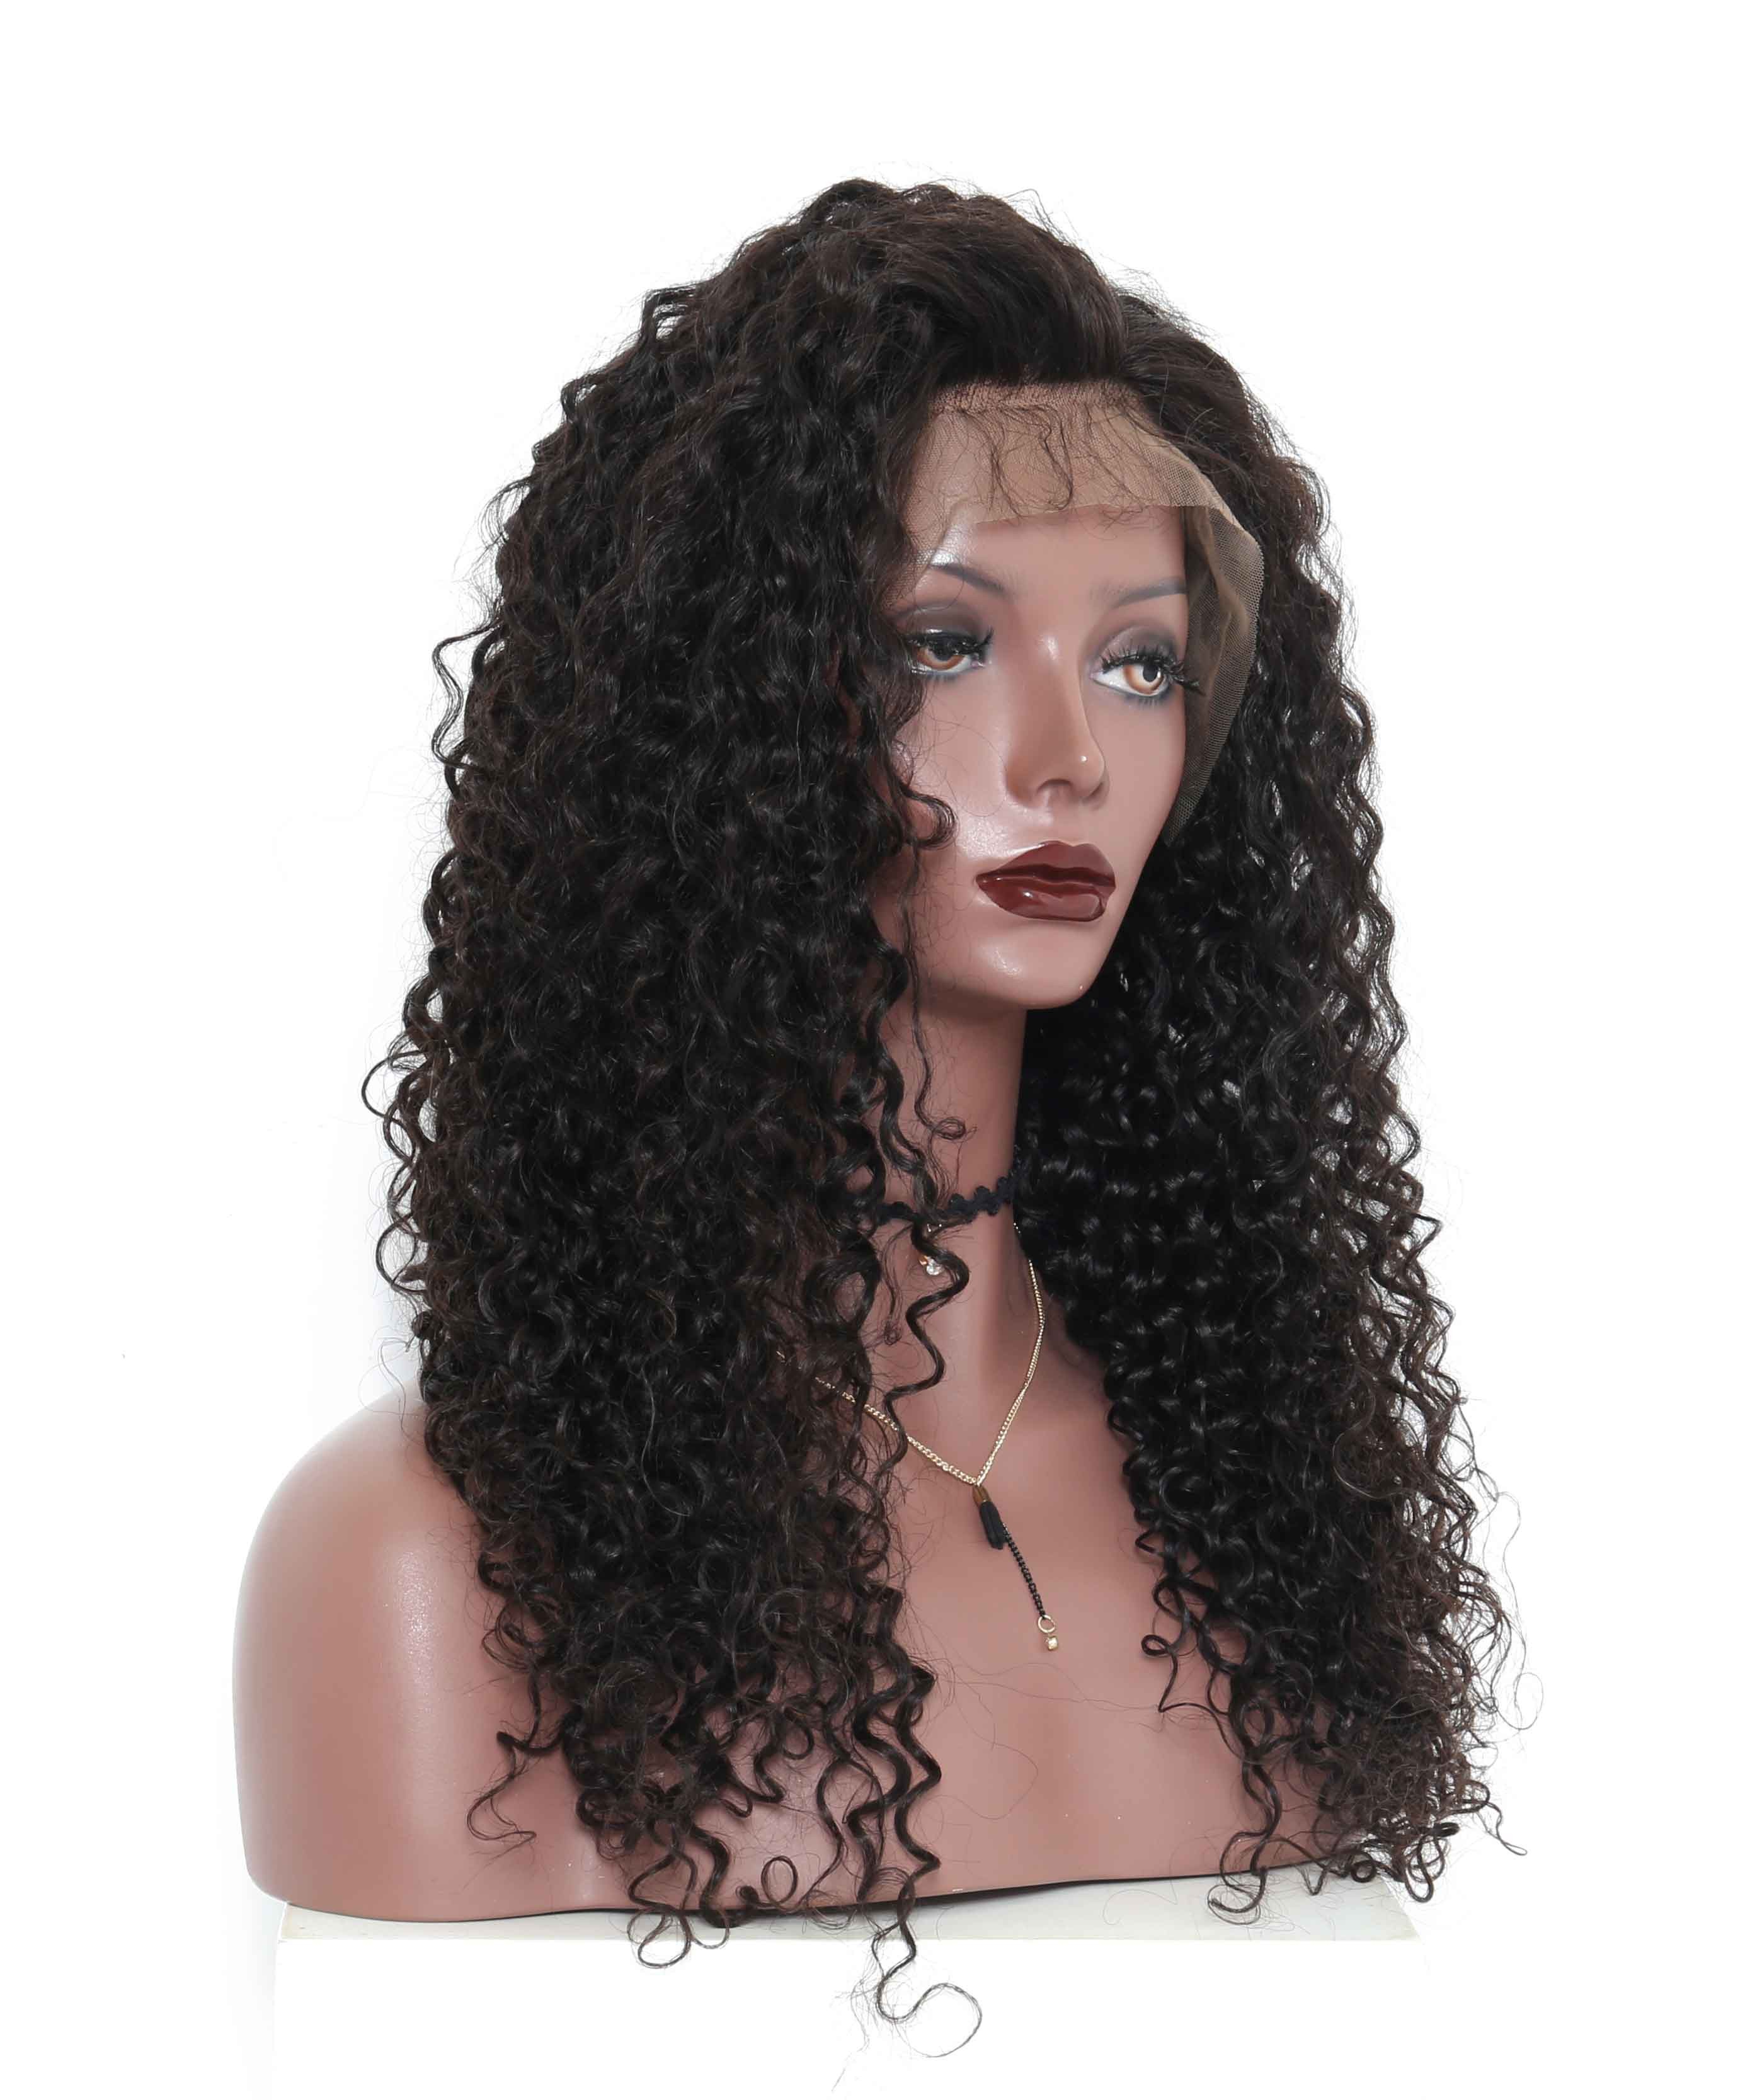 Lace Front Wigs Deep Curly 150 Density Pre Plucked Human Hair Wigs